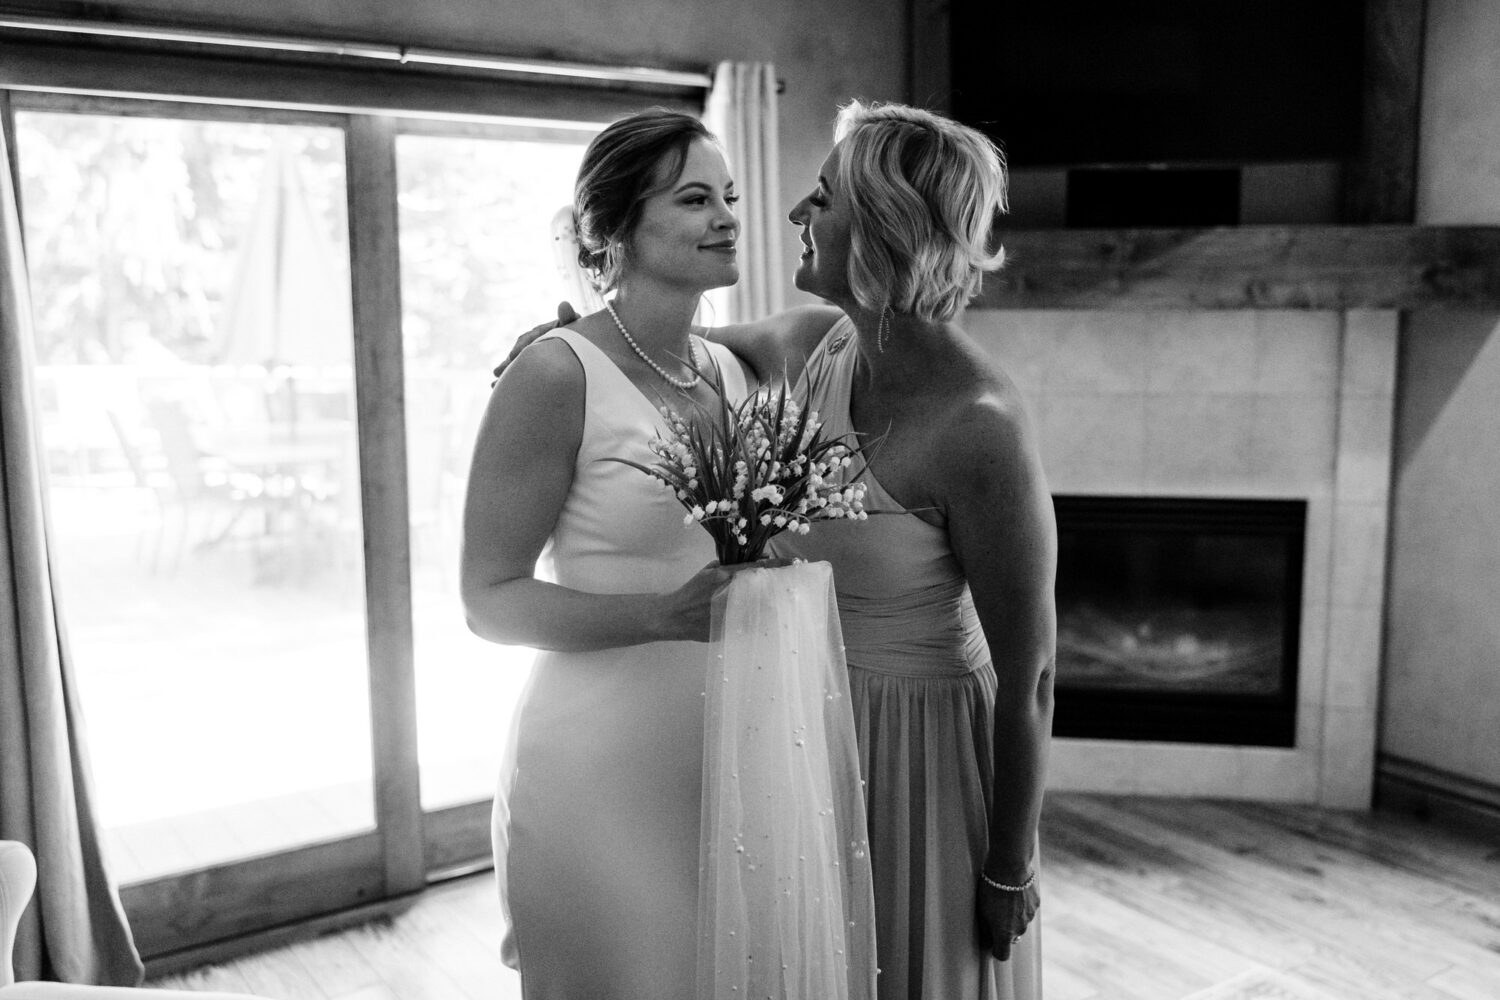 A special moment between the bride and her mother, captured by Lake Tahoe wedding photographer Chris Werner.